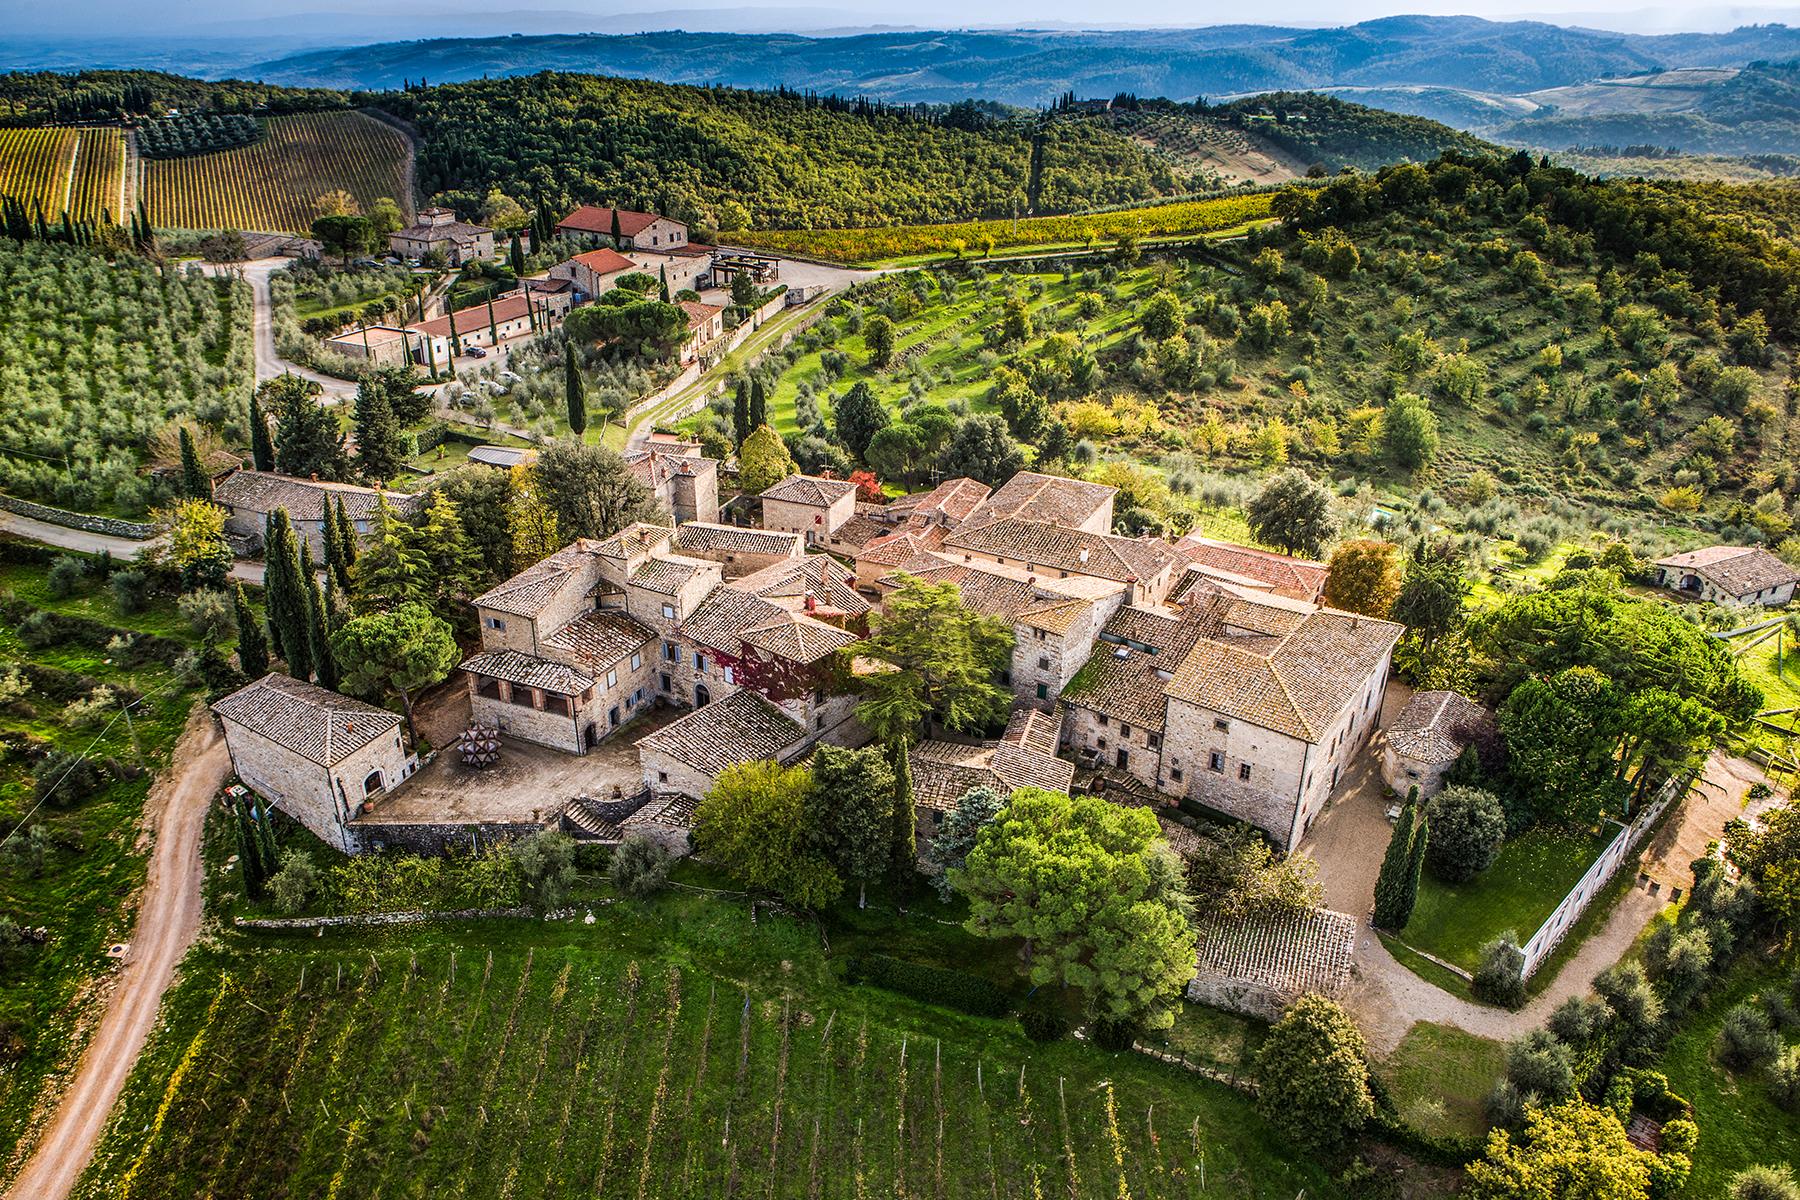 The 10 Best Wineries, Vineyards, and Wine Tasting Experiences in Tuscany